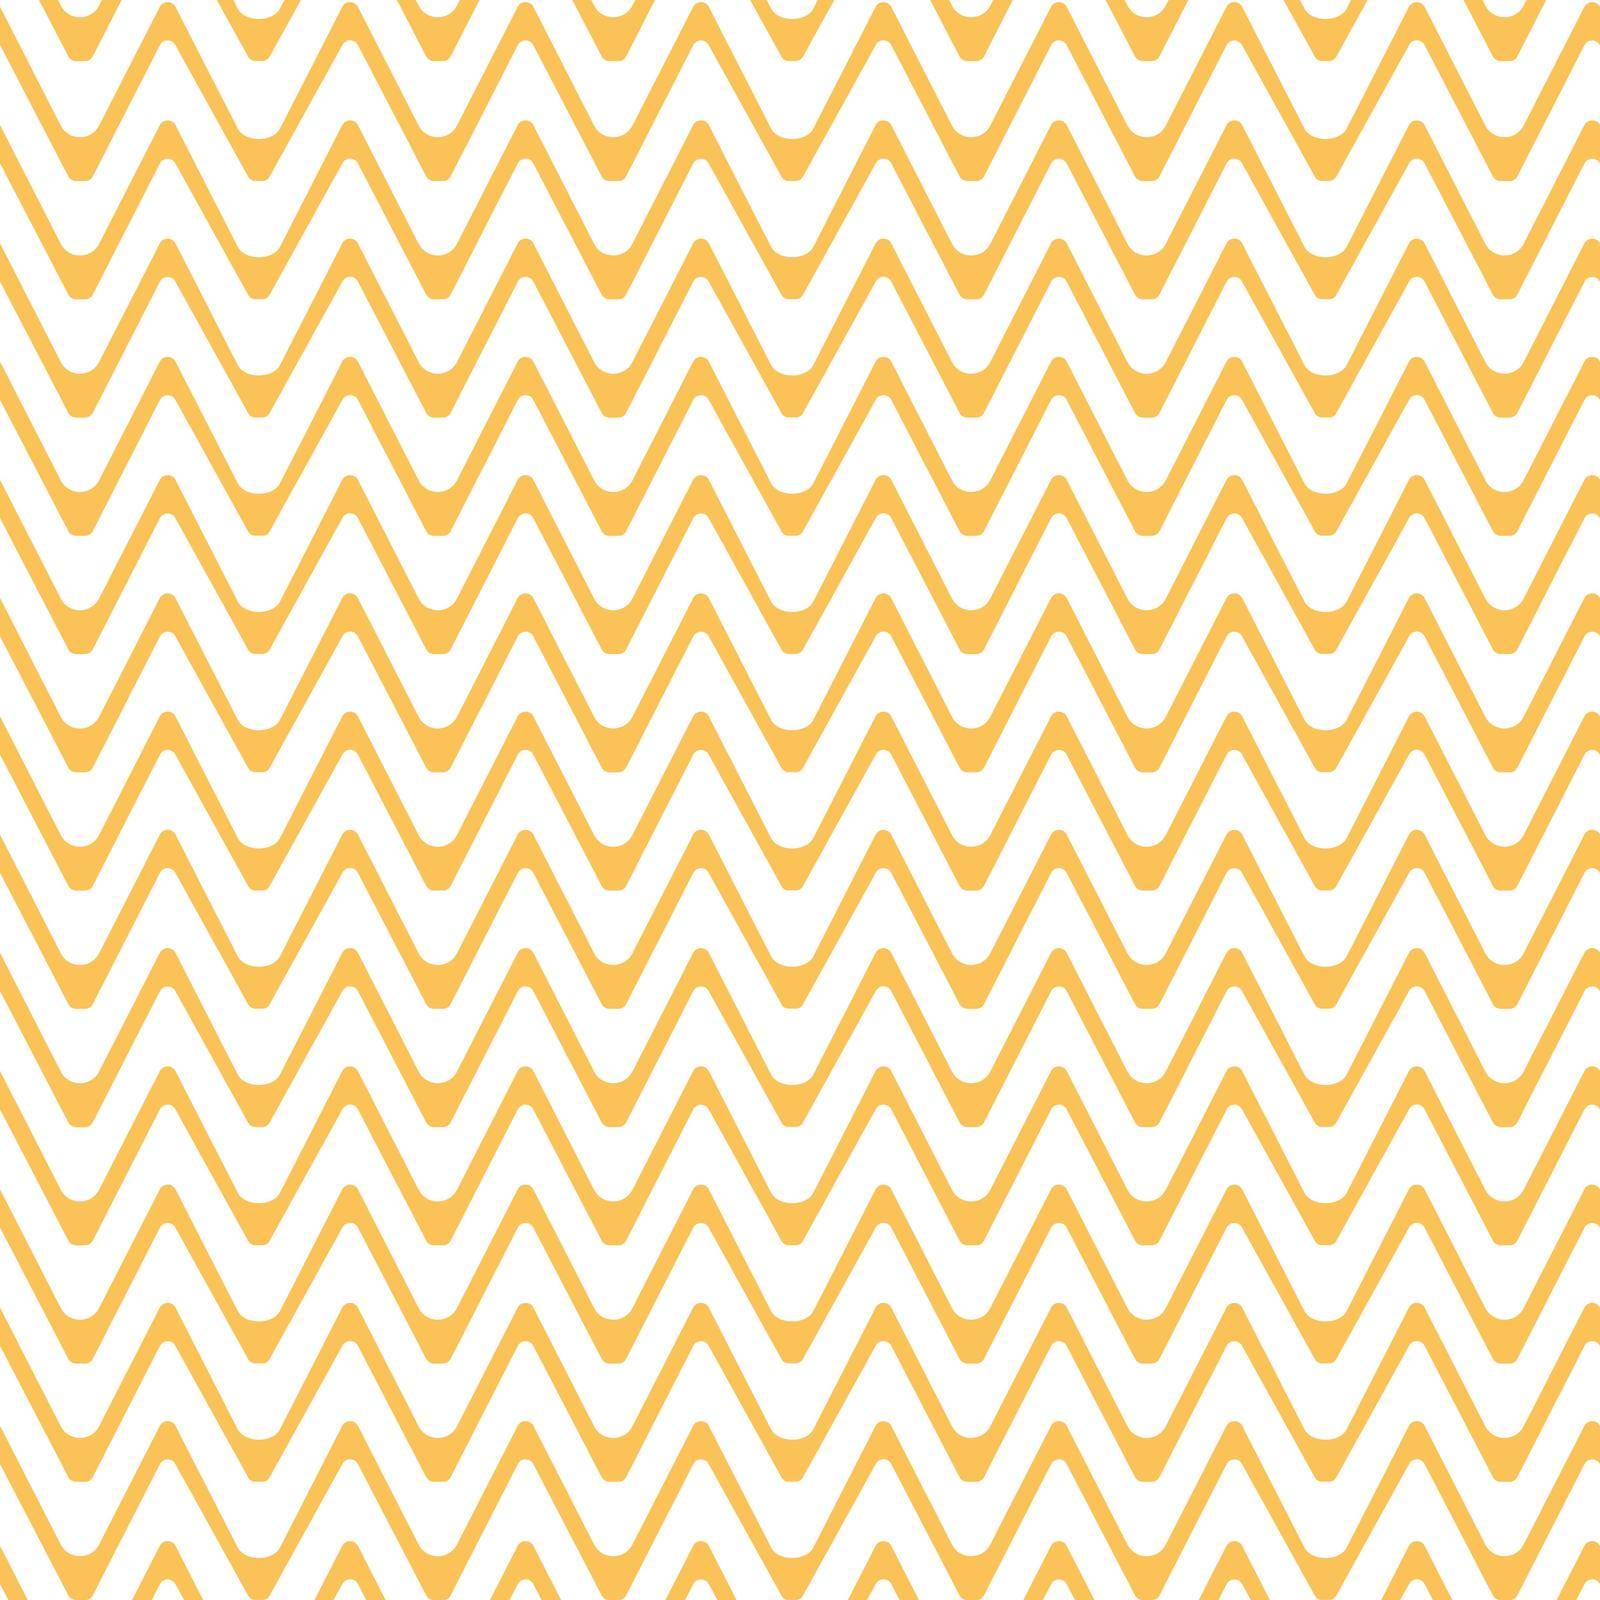 Design business Empty template isolated Minimalist graphic layout template for advertising Horizontal Zigzag Wavy Parallel Line in Seamless Repeat Pattern Vector by nialowwa